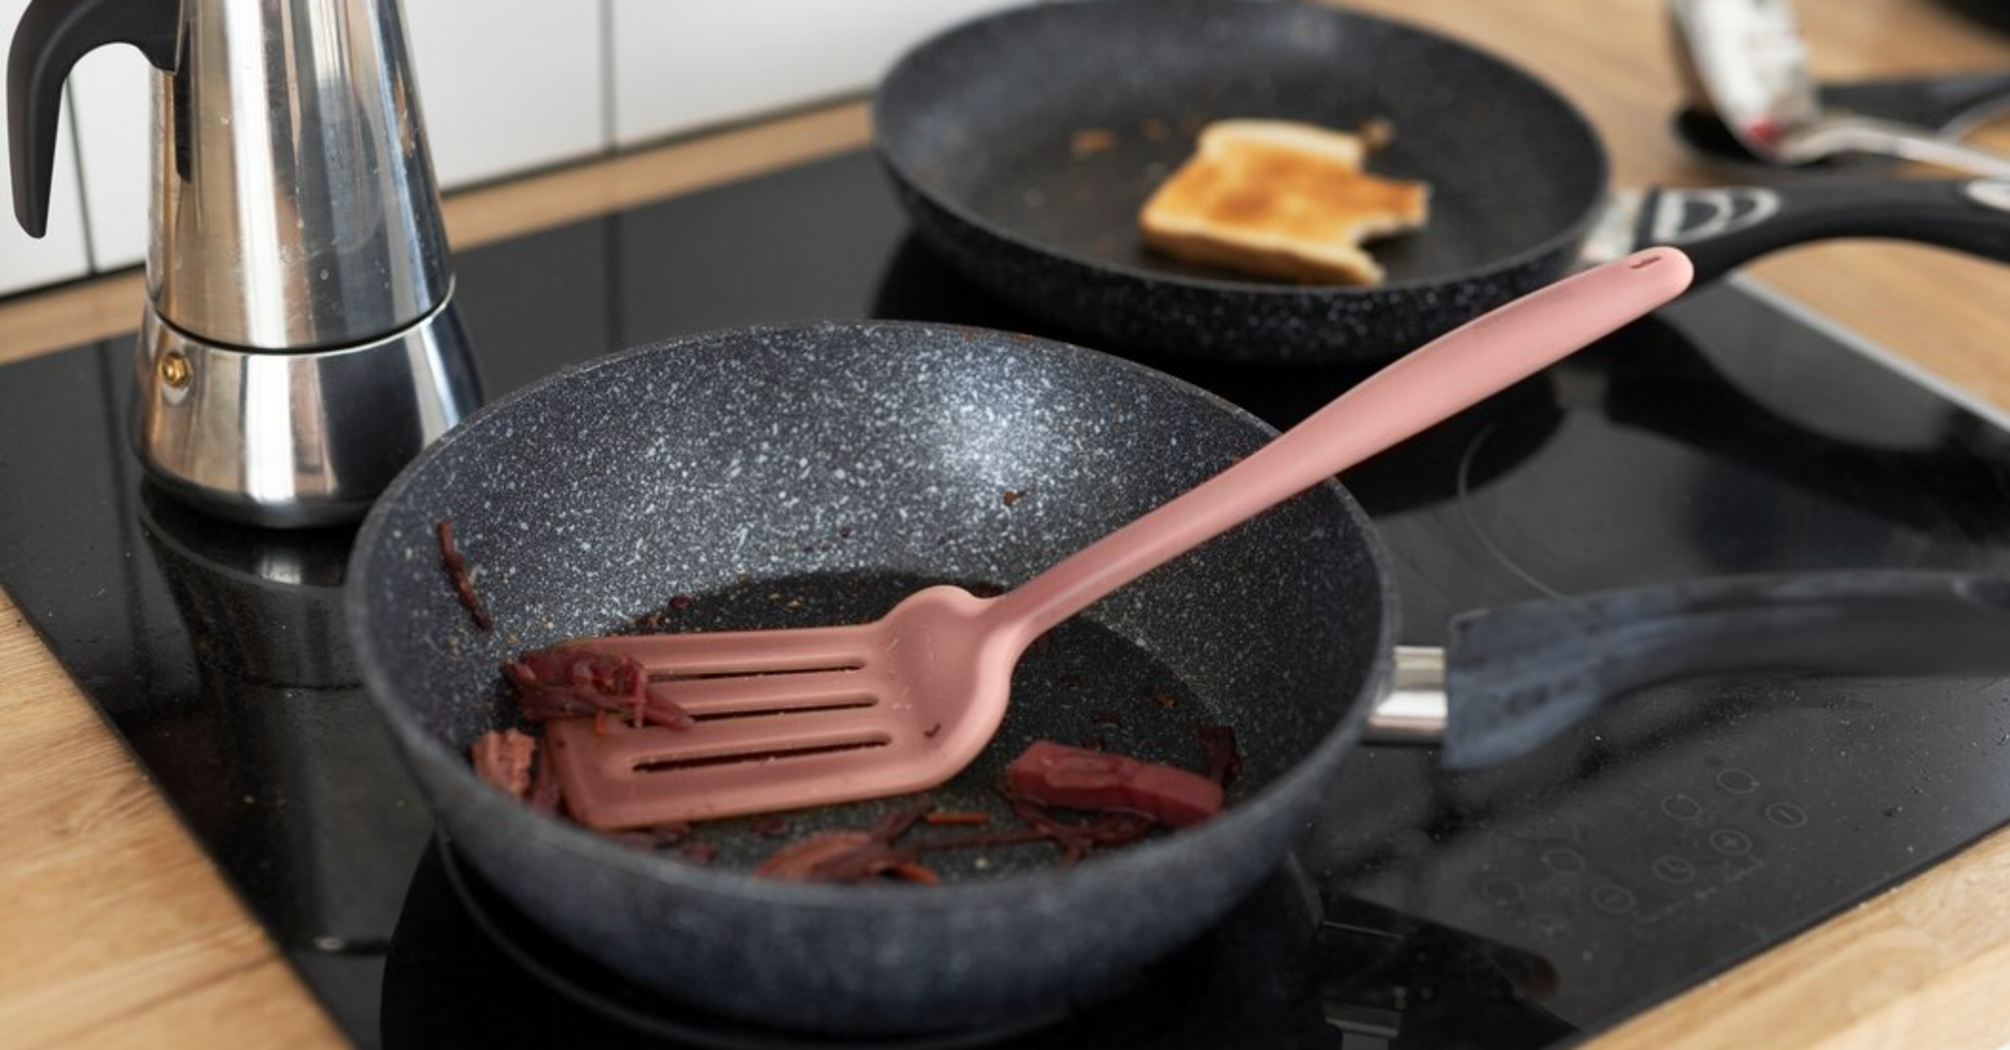 It's a big mistake: why you should never wash a hot pan